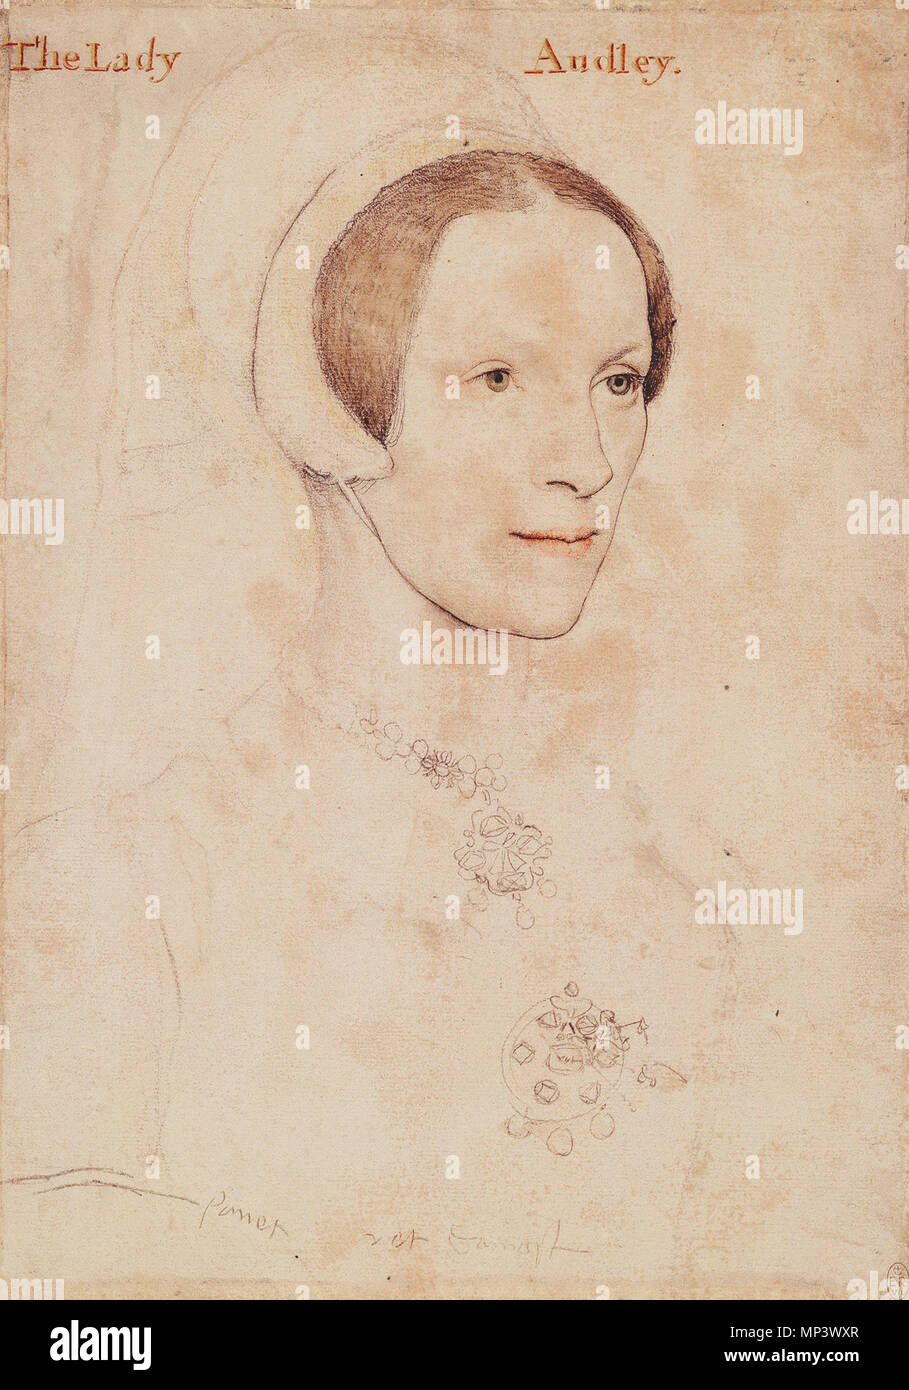 . English: Portrait of Lady Audley. Coloured chalks, silverpoint, pen and ink on pink-primed paper, 29.2 × 20.7 cm, Royal Collection, Windsor Castle. The drawing is inscribed, by a later hand than Holbein's, 'The Lady Audley'. There were two ladies called Elizabeth, Lady Audley. One was the daughter of Sir Brian Tuke, whom Holbein also painted; but she did not become Lady Audley until 1557. The more likely sitter is Elizabeth Grey (d. 1564), who married Lord Audley of Walden in 1538. This study was used for Holbein's miniature portrait of the same sitter, probably scaled down with compasses (S Stock Photo